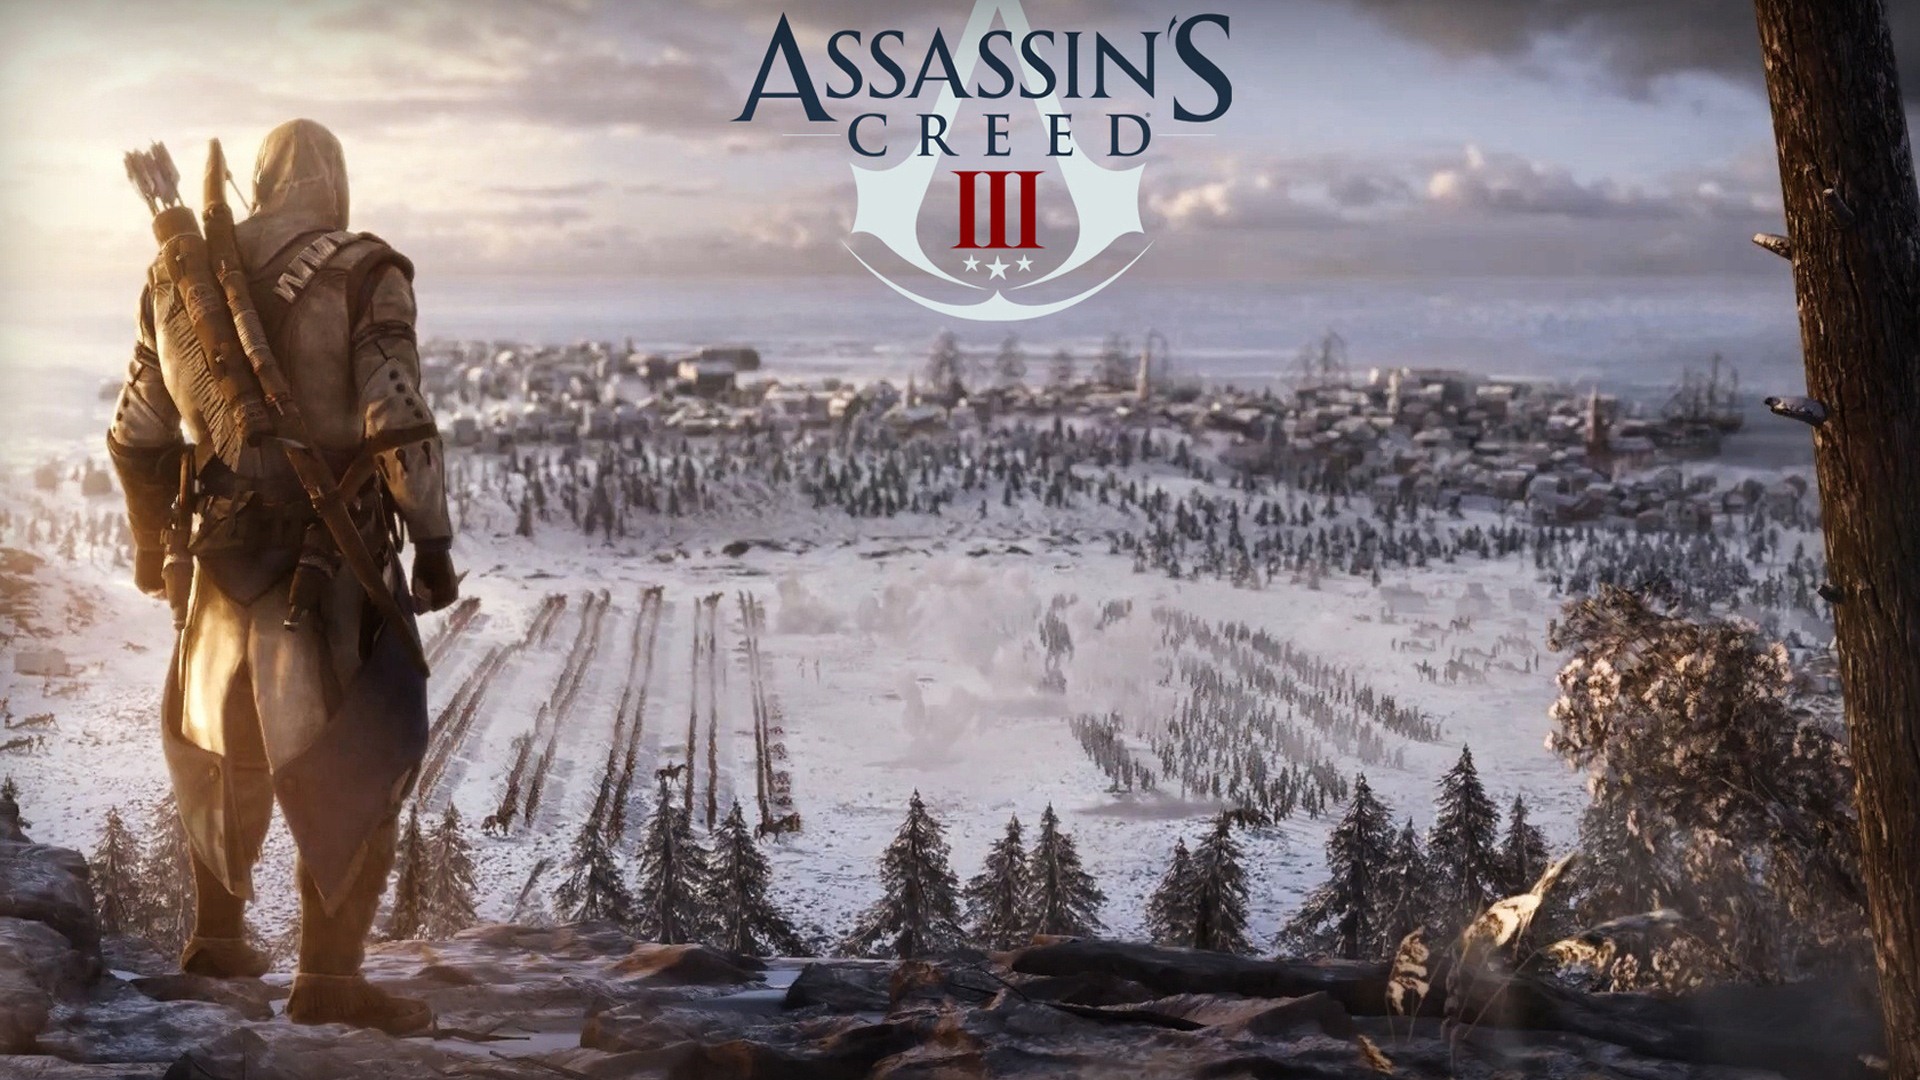 Assassin's Creed 3 HD wallpapers #17 - 1920x1080